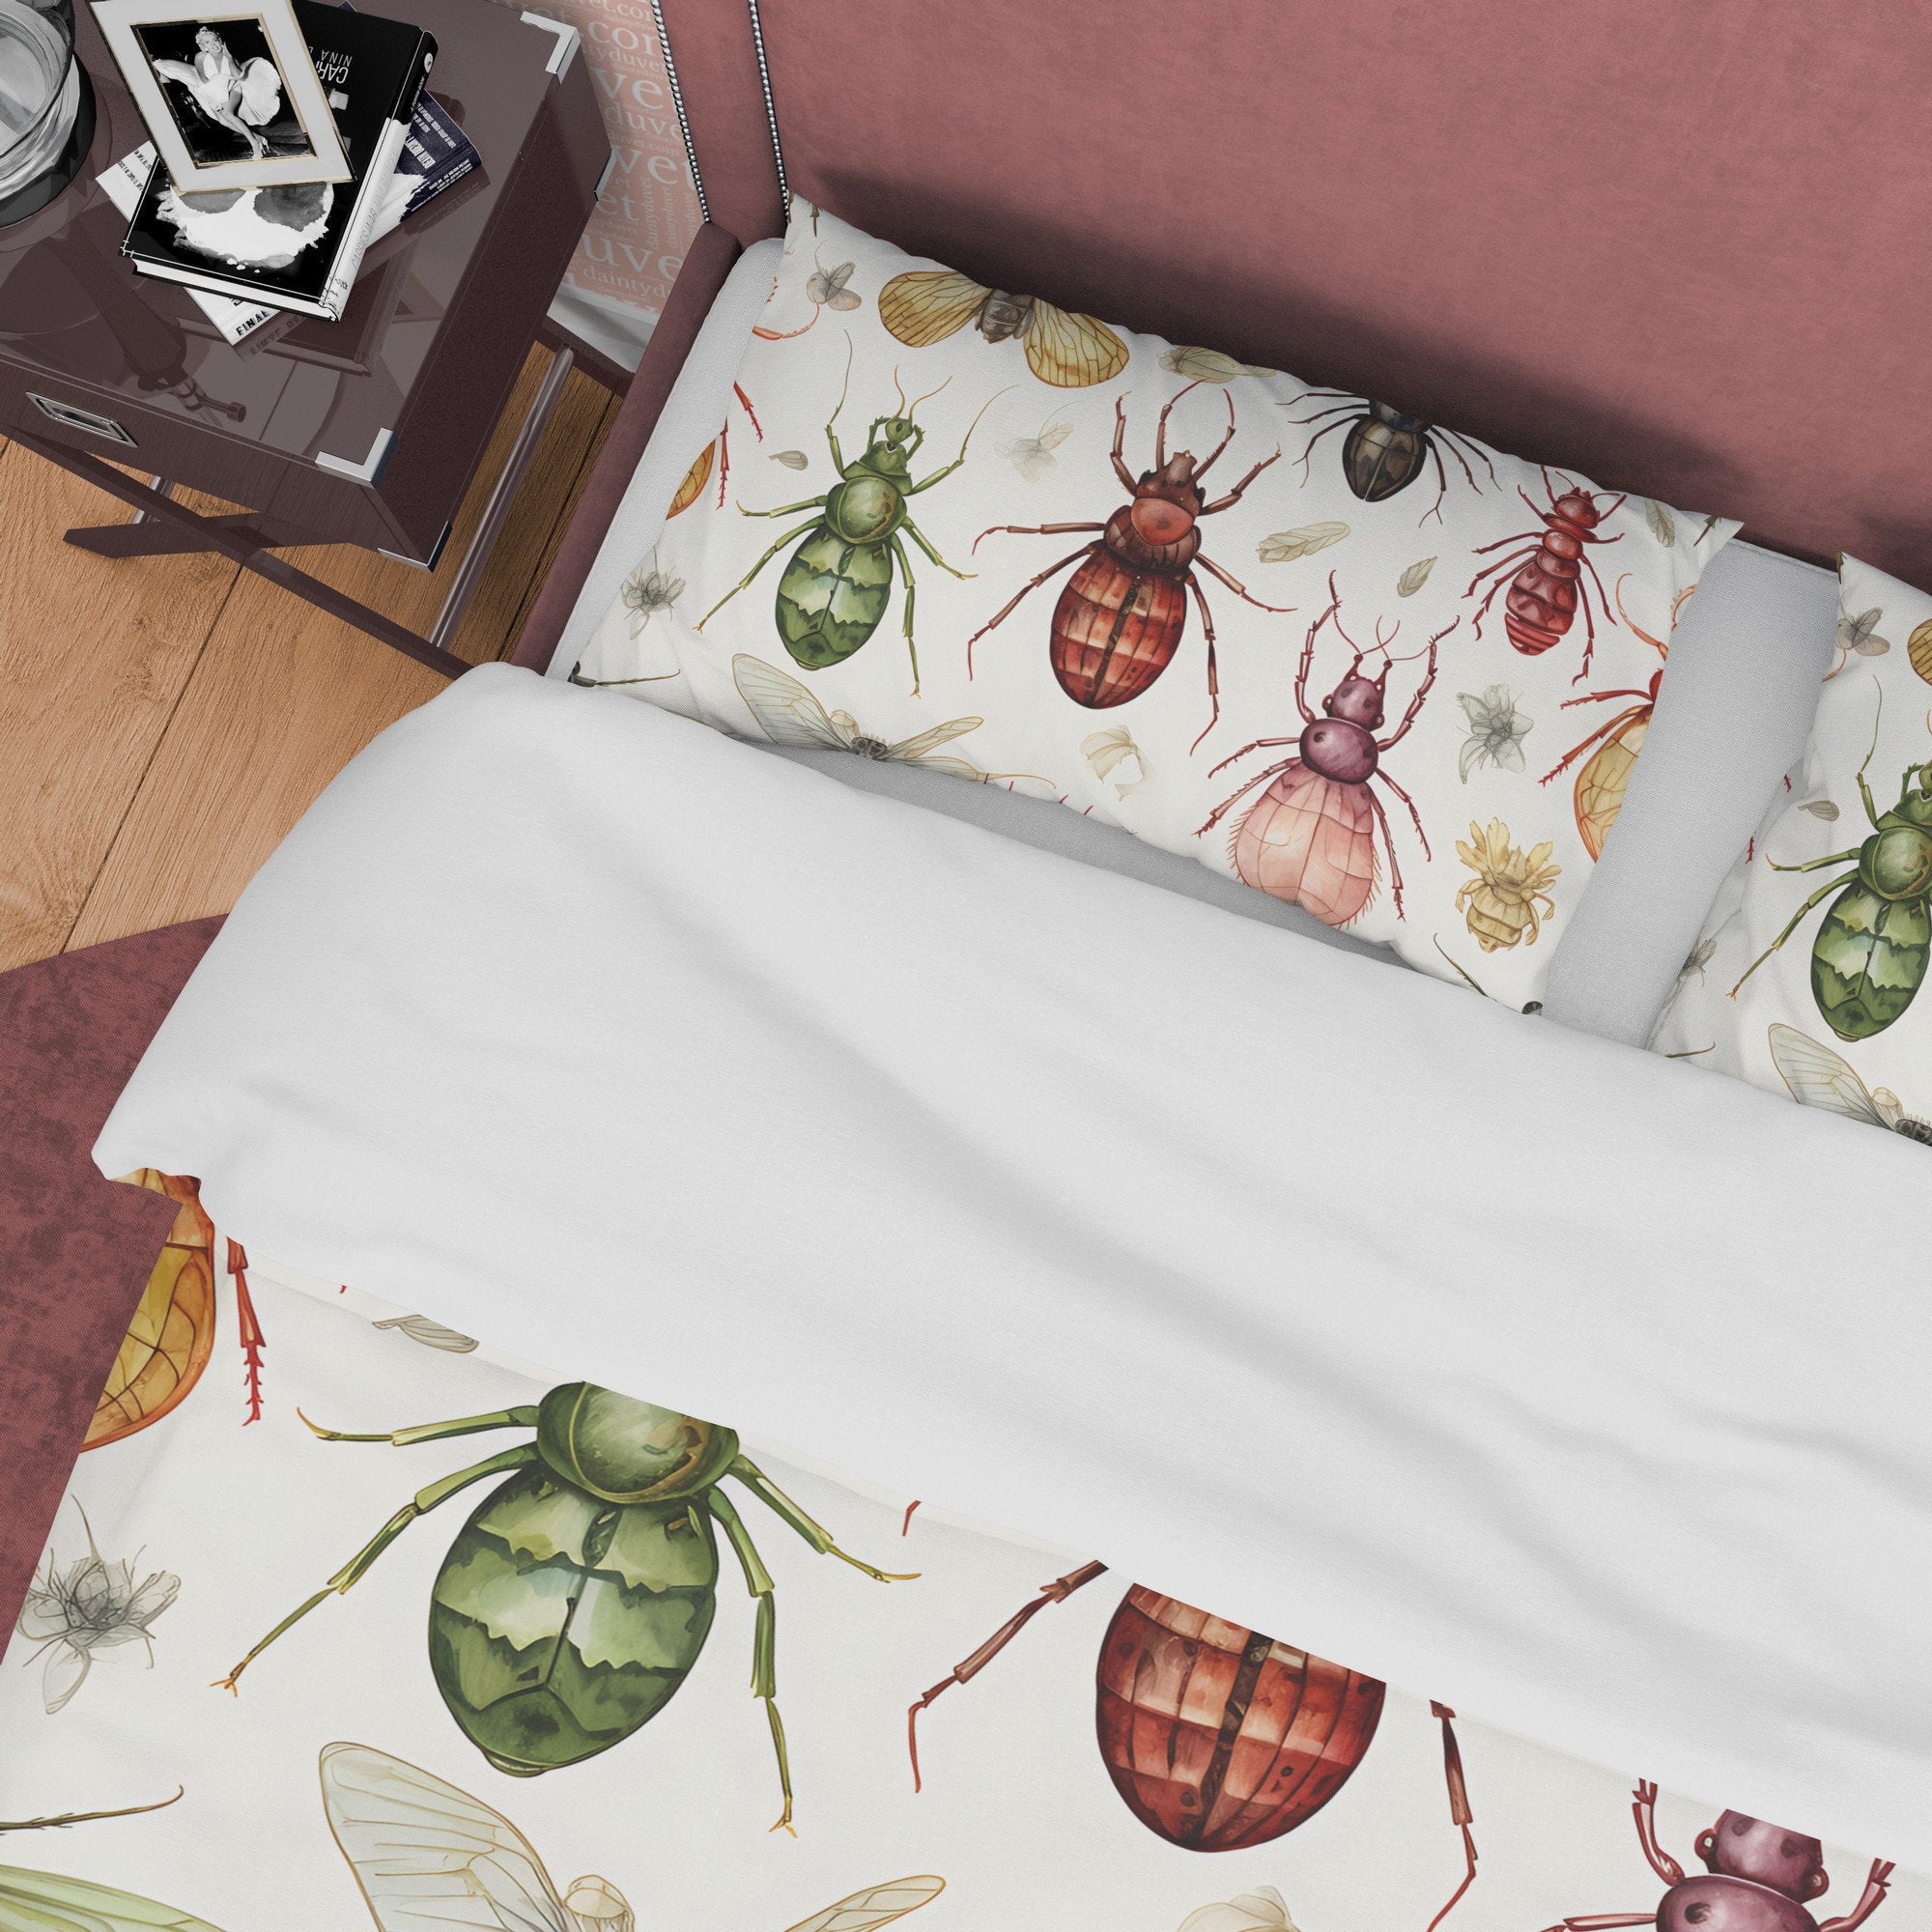 Scary Bug Halloween Duvet Cover Set & Pillowcase, Creepy Insect White Quilt Cover Aesthetic Zipper Bedding, Halloween Room Decor,